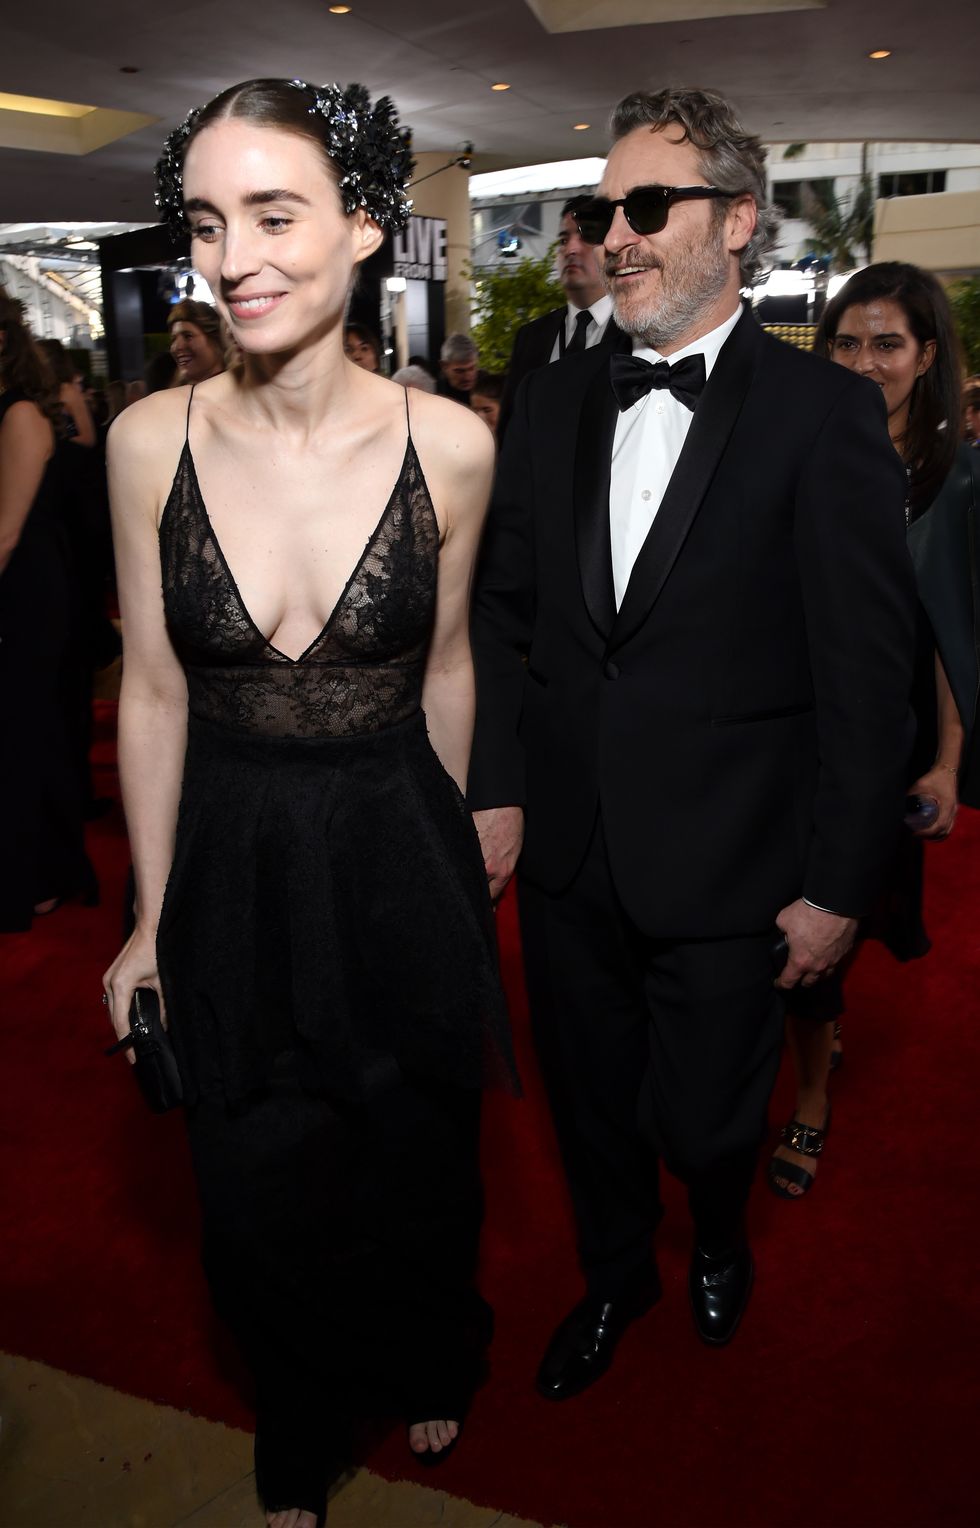 Rooney Mara and Joaquin Phoenix at the Golden Globes in January 2020.